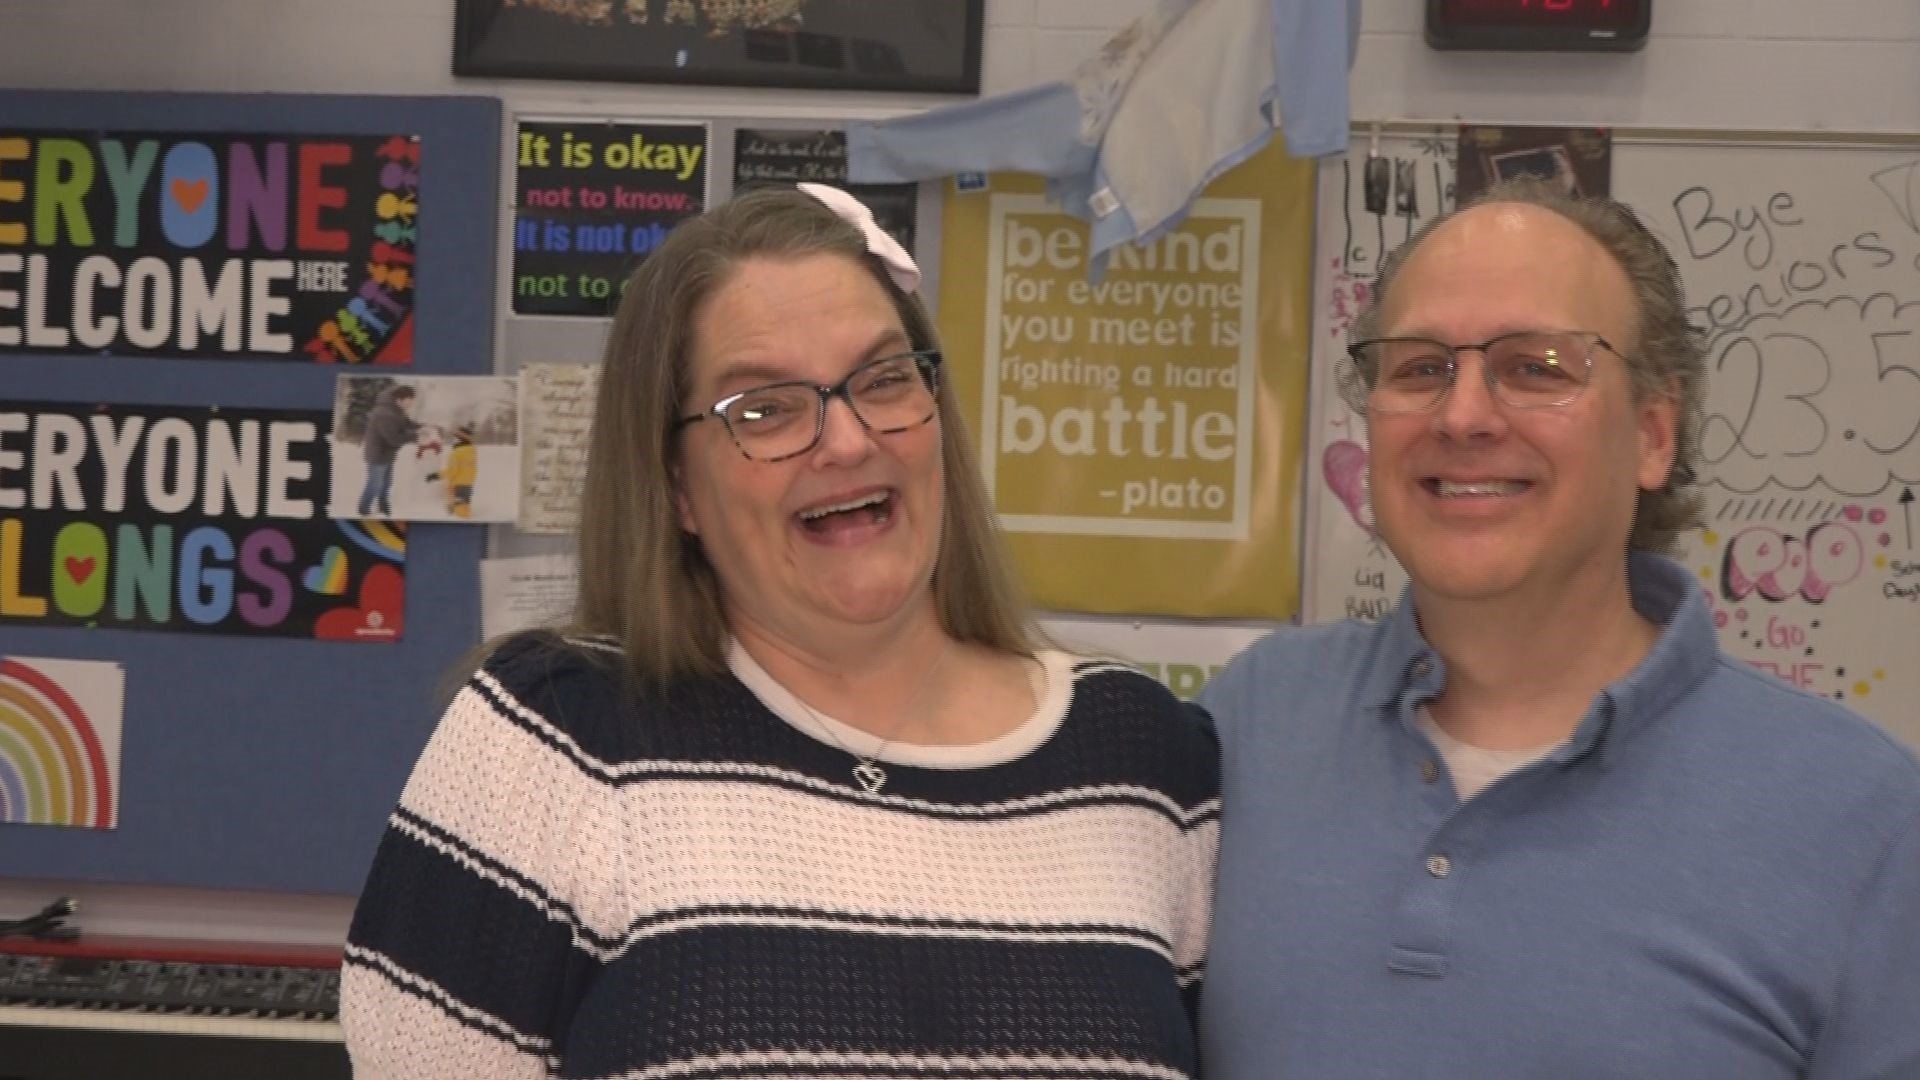 Shawn and Molly Lawton said teaching music to thousands of students for more than 30 years has been a fun ride, saying they had no idea of the impact until now.